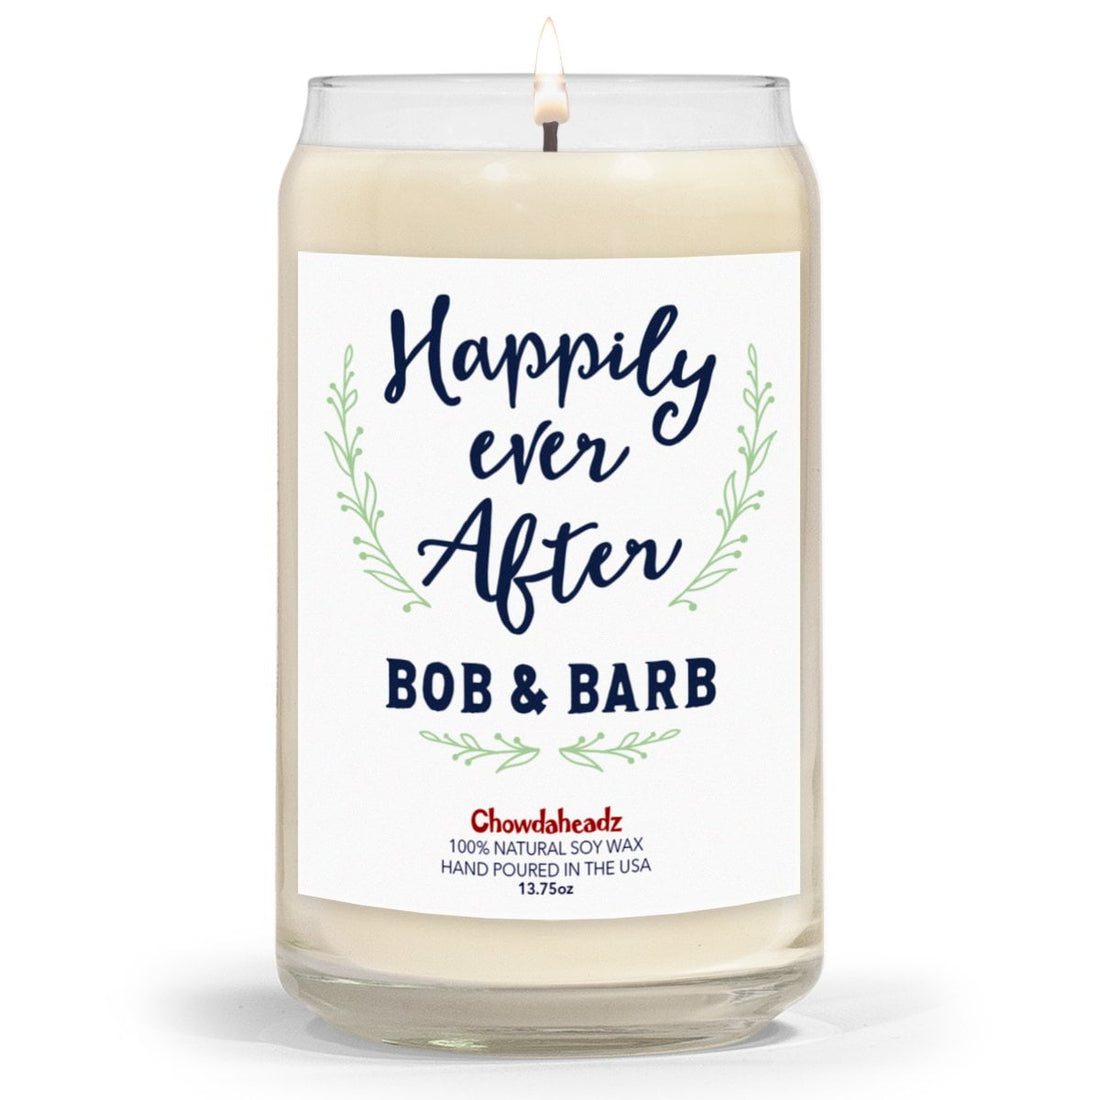 Happily Ever After Custom 13.75oz Candle - Chowdaheadz